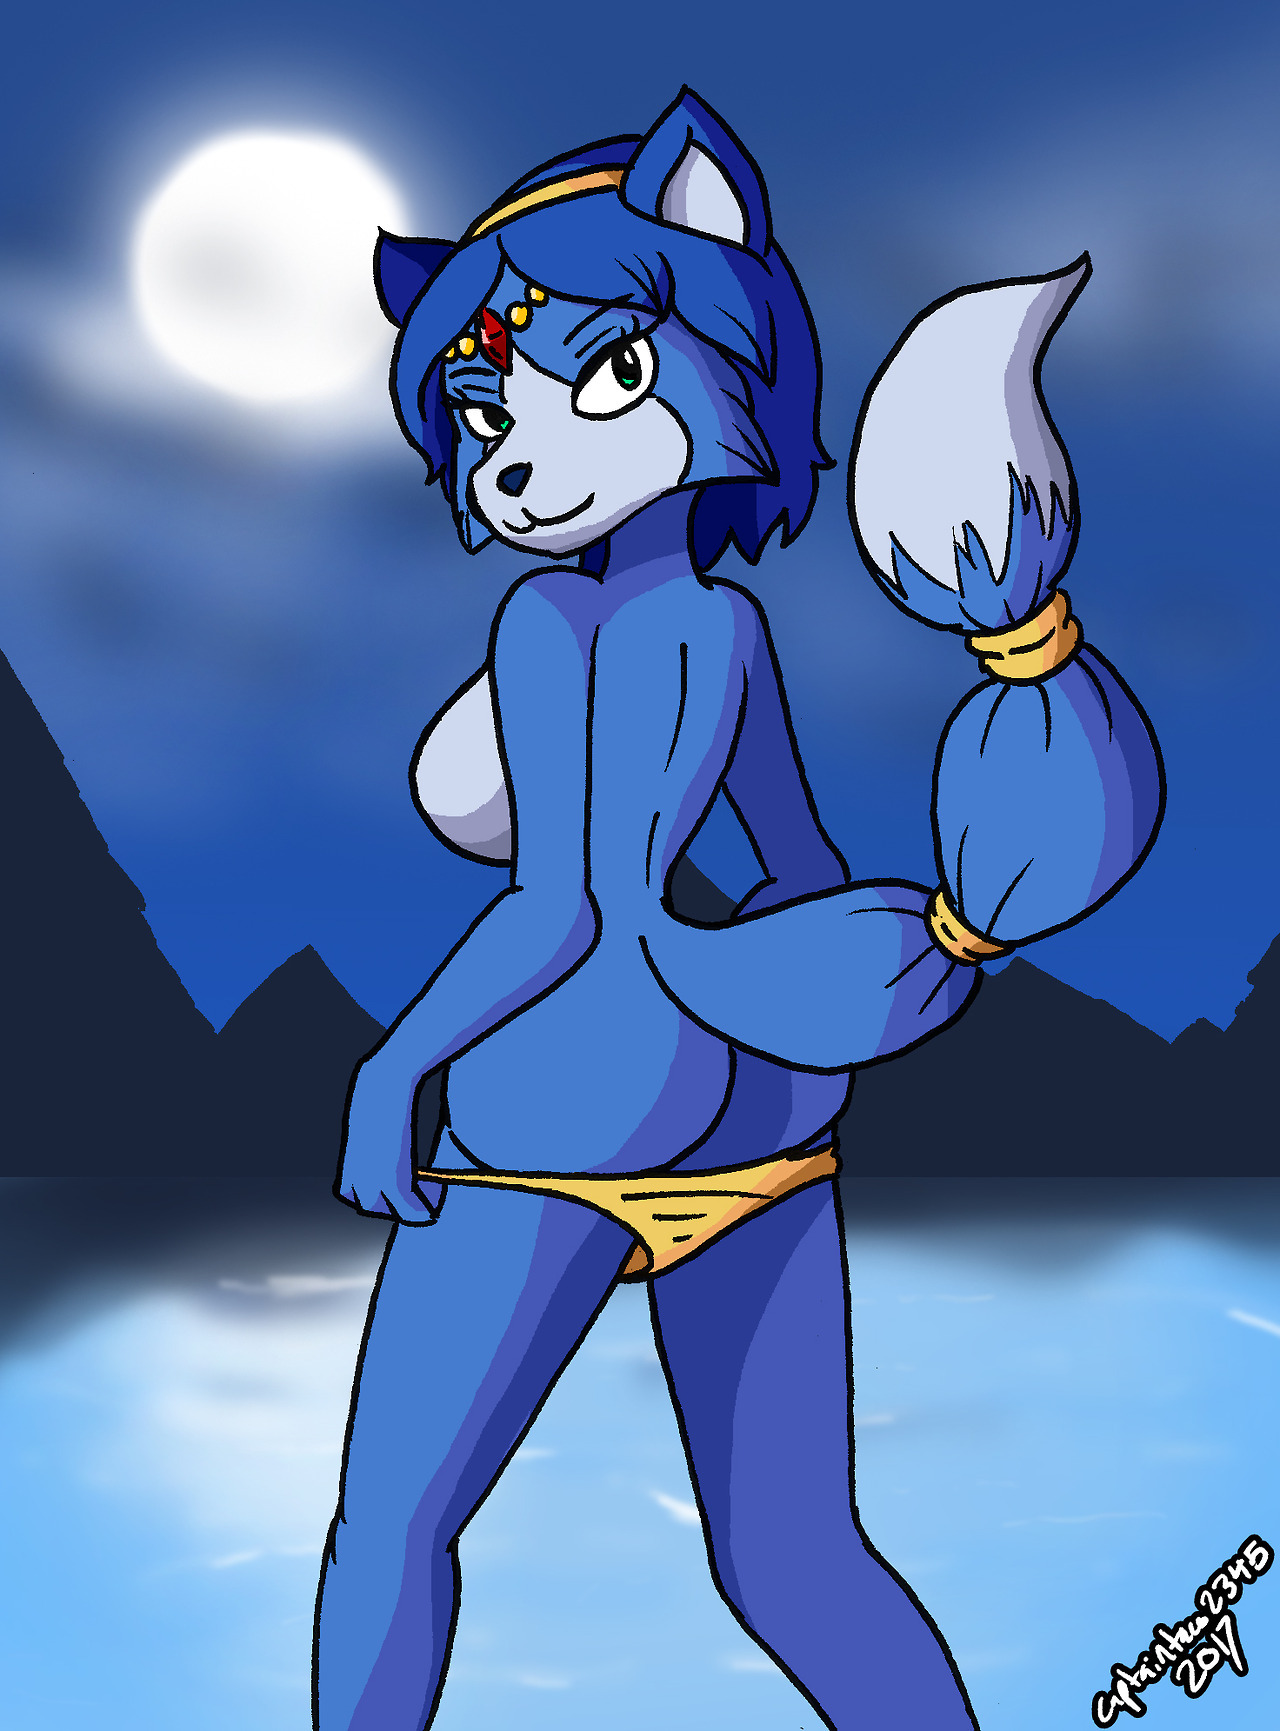 I did this portrait of Krystal from Star Fox, but I liked it so much I added a background.